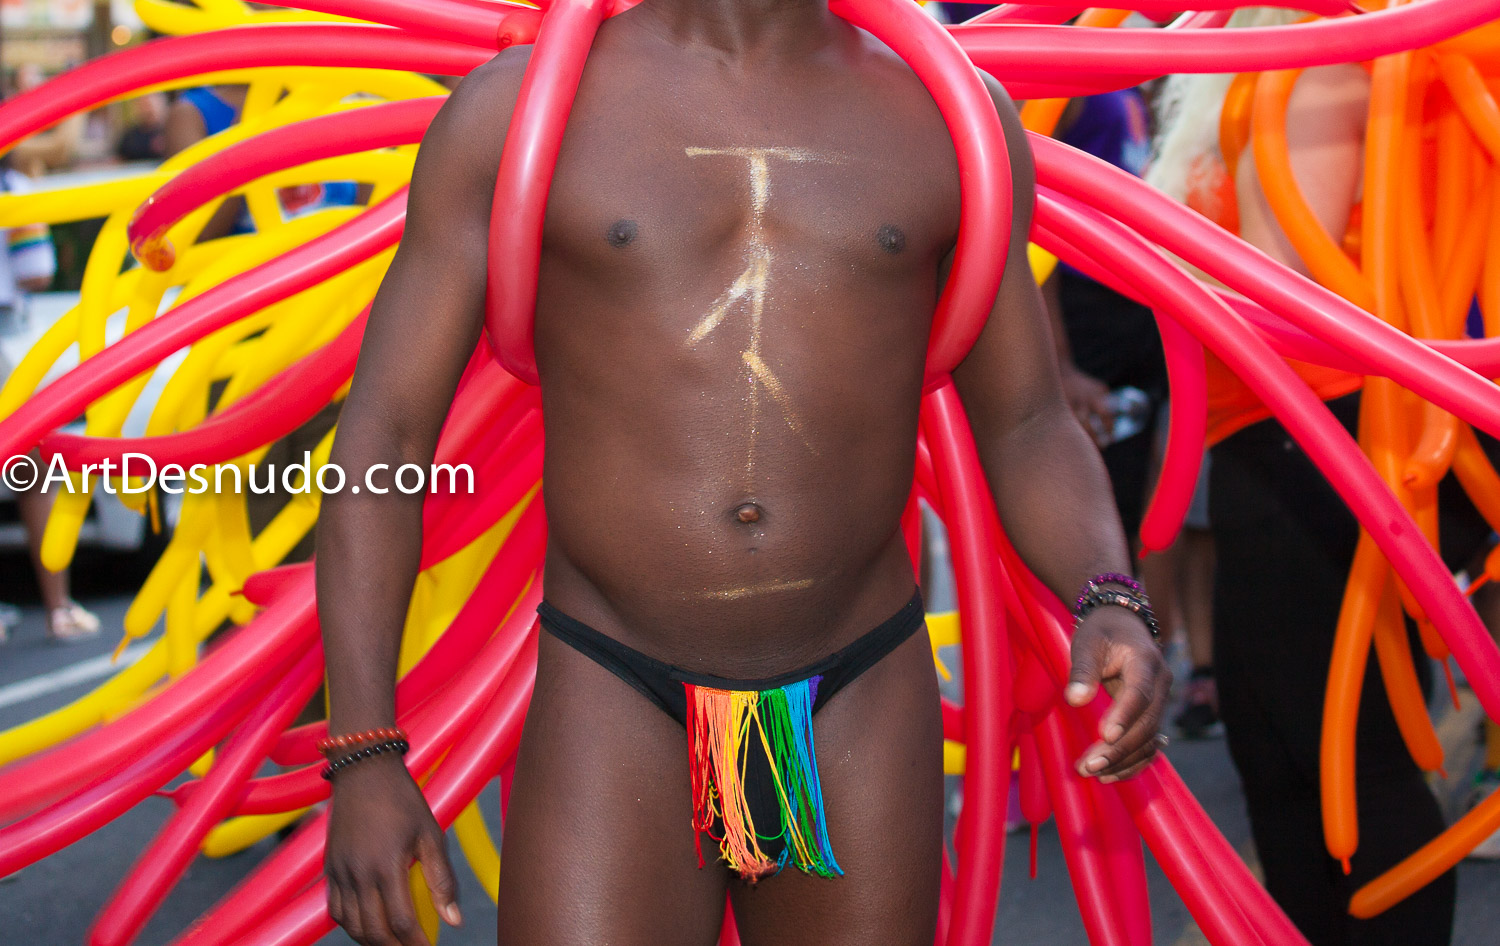 Saturday, June 8th, 2019. Brooklyn, New York City - This year, Brooklyn celebrated the 23rd Annual Brooklyn Pride Parade/March. This year is the 50th anniversary of the Stonewall revolution. Brooklyn Pride is the only New York City night time parade/march. The parade started at Lincoln Place and 5th Ave and ended at 9th Street and 5th Avenue.